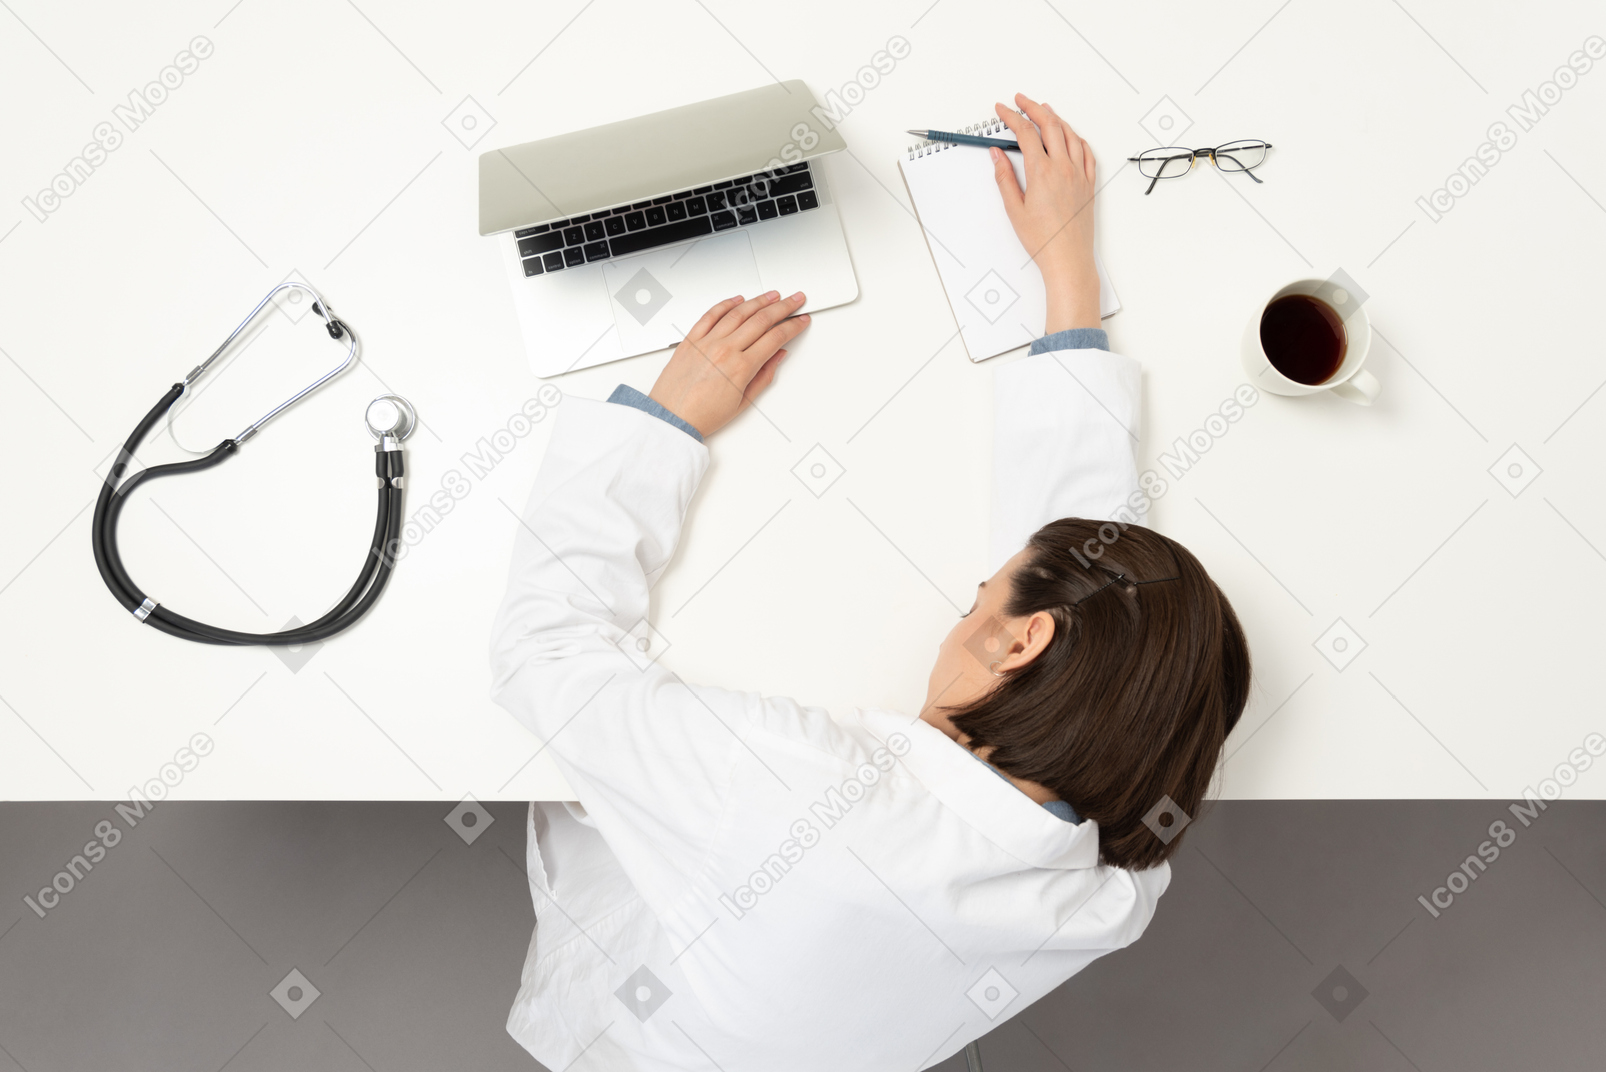 A female doctor sleeping on the table